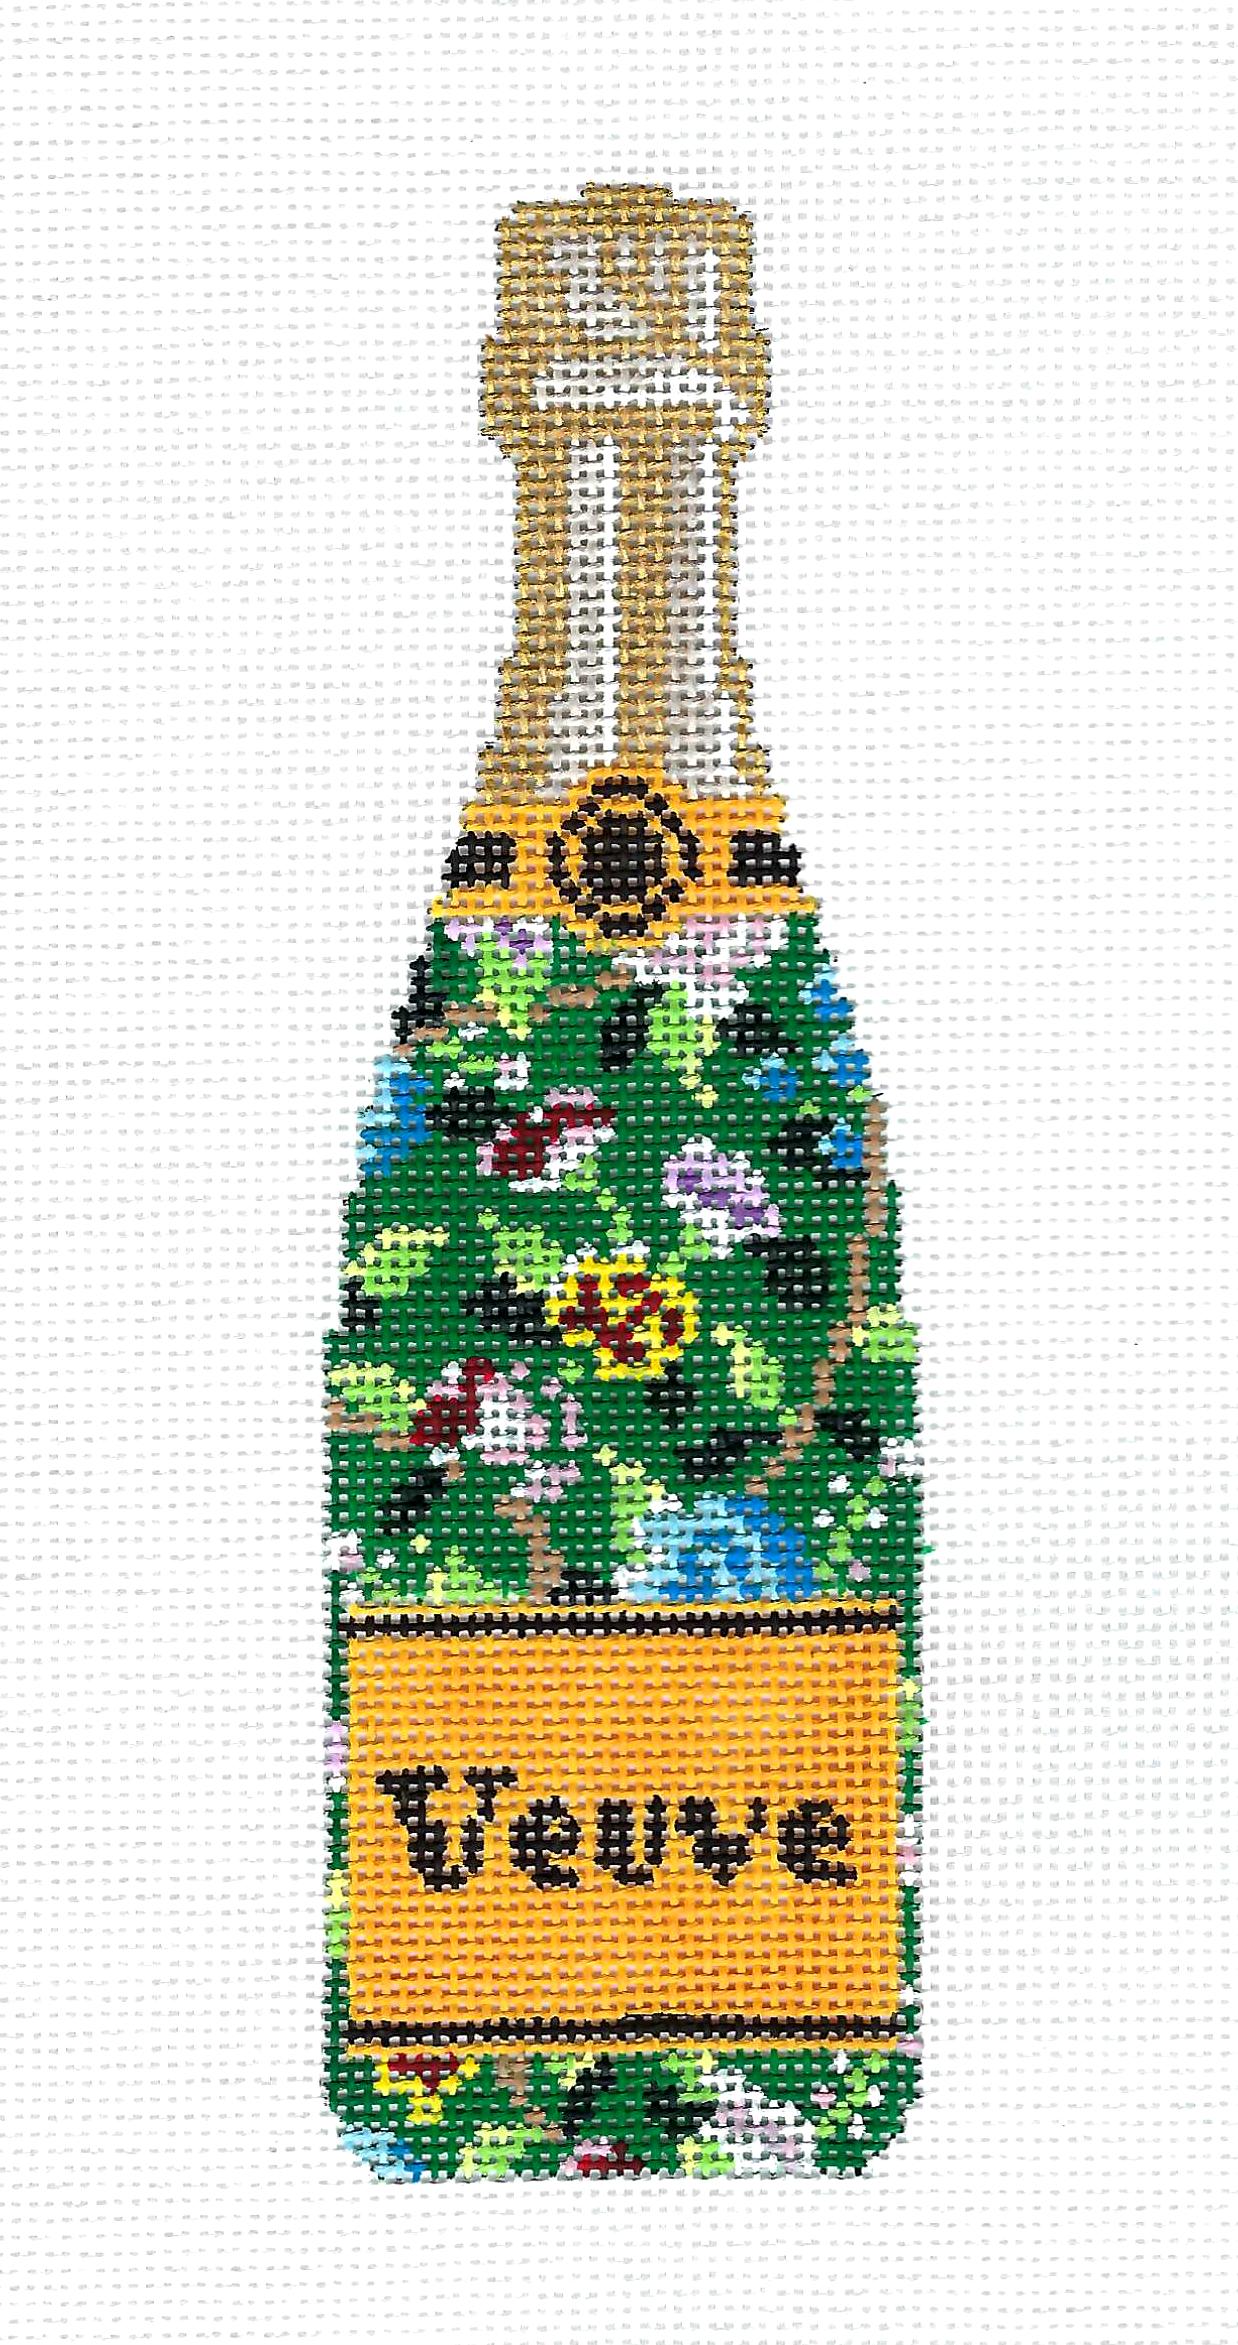 "Veuve" Champagne Bottle in Green Floral Design 18 Mesh handpainted Needlepoint Canvas by C'ate La Vie